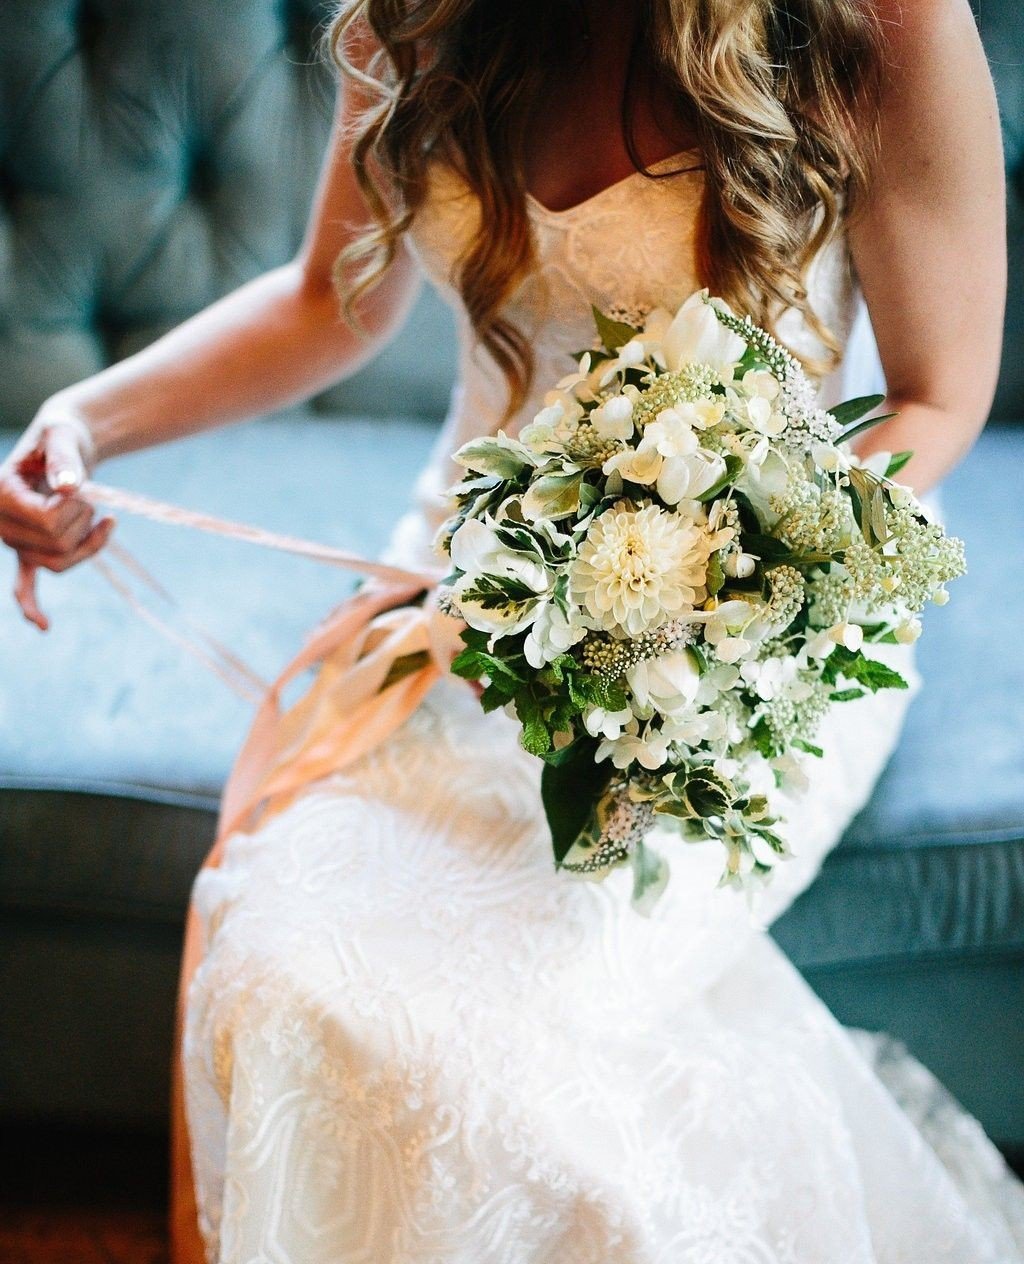 Embracing the beauty of spring with this ethereal bouquet. 🌷Notice how it perfectly complements the textures of the Bride's lace dress and velvet couch? A great florist who understands you, your personality and your entire wedding day vision will wo